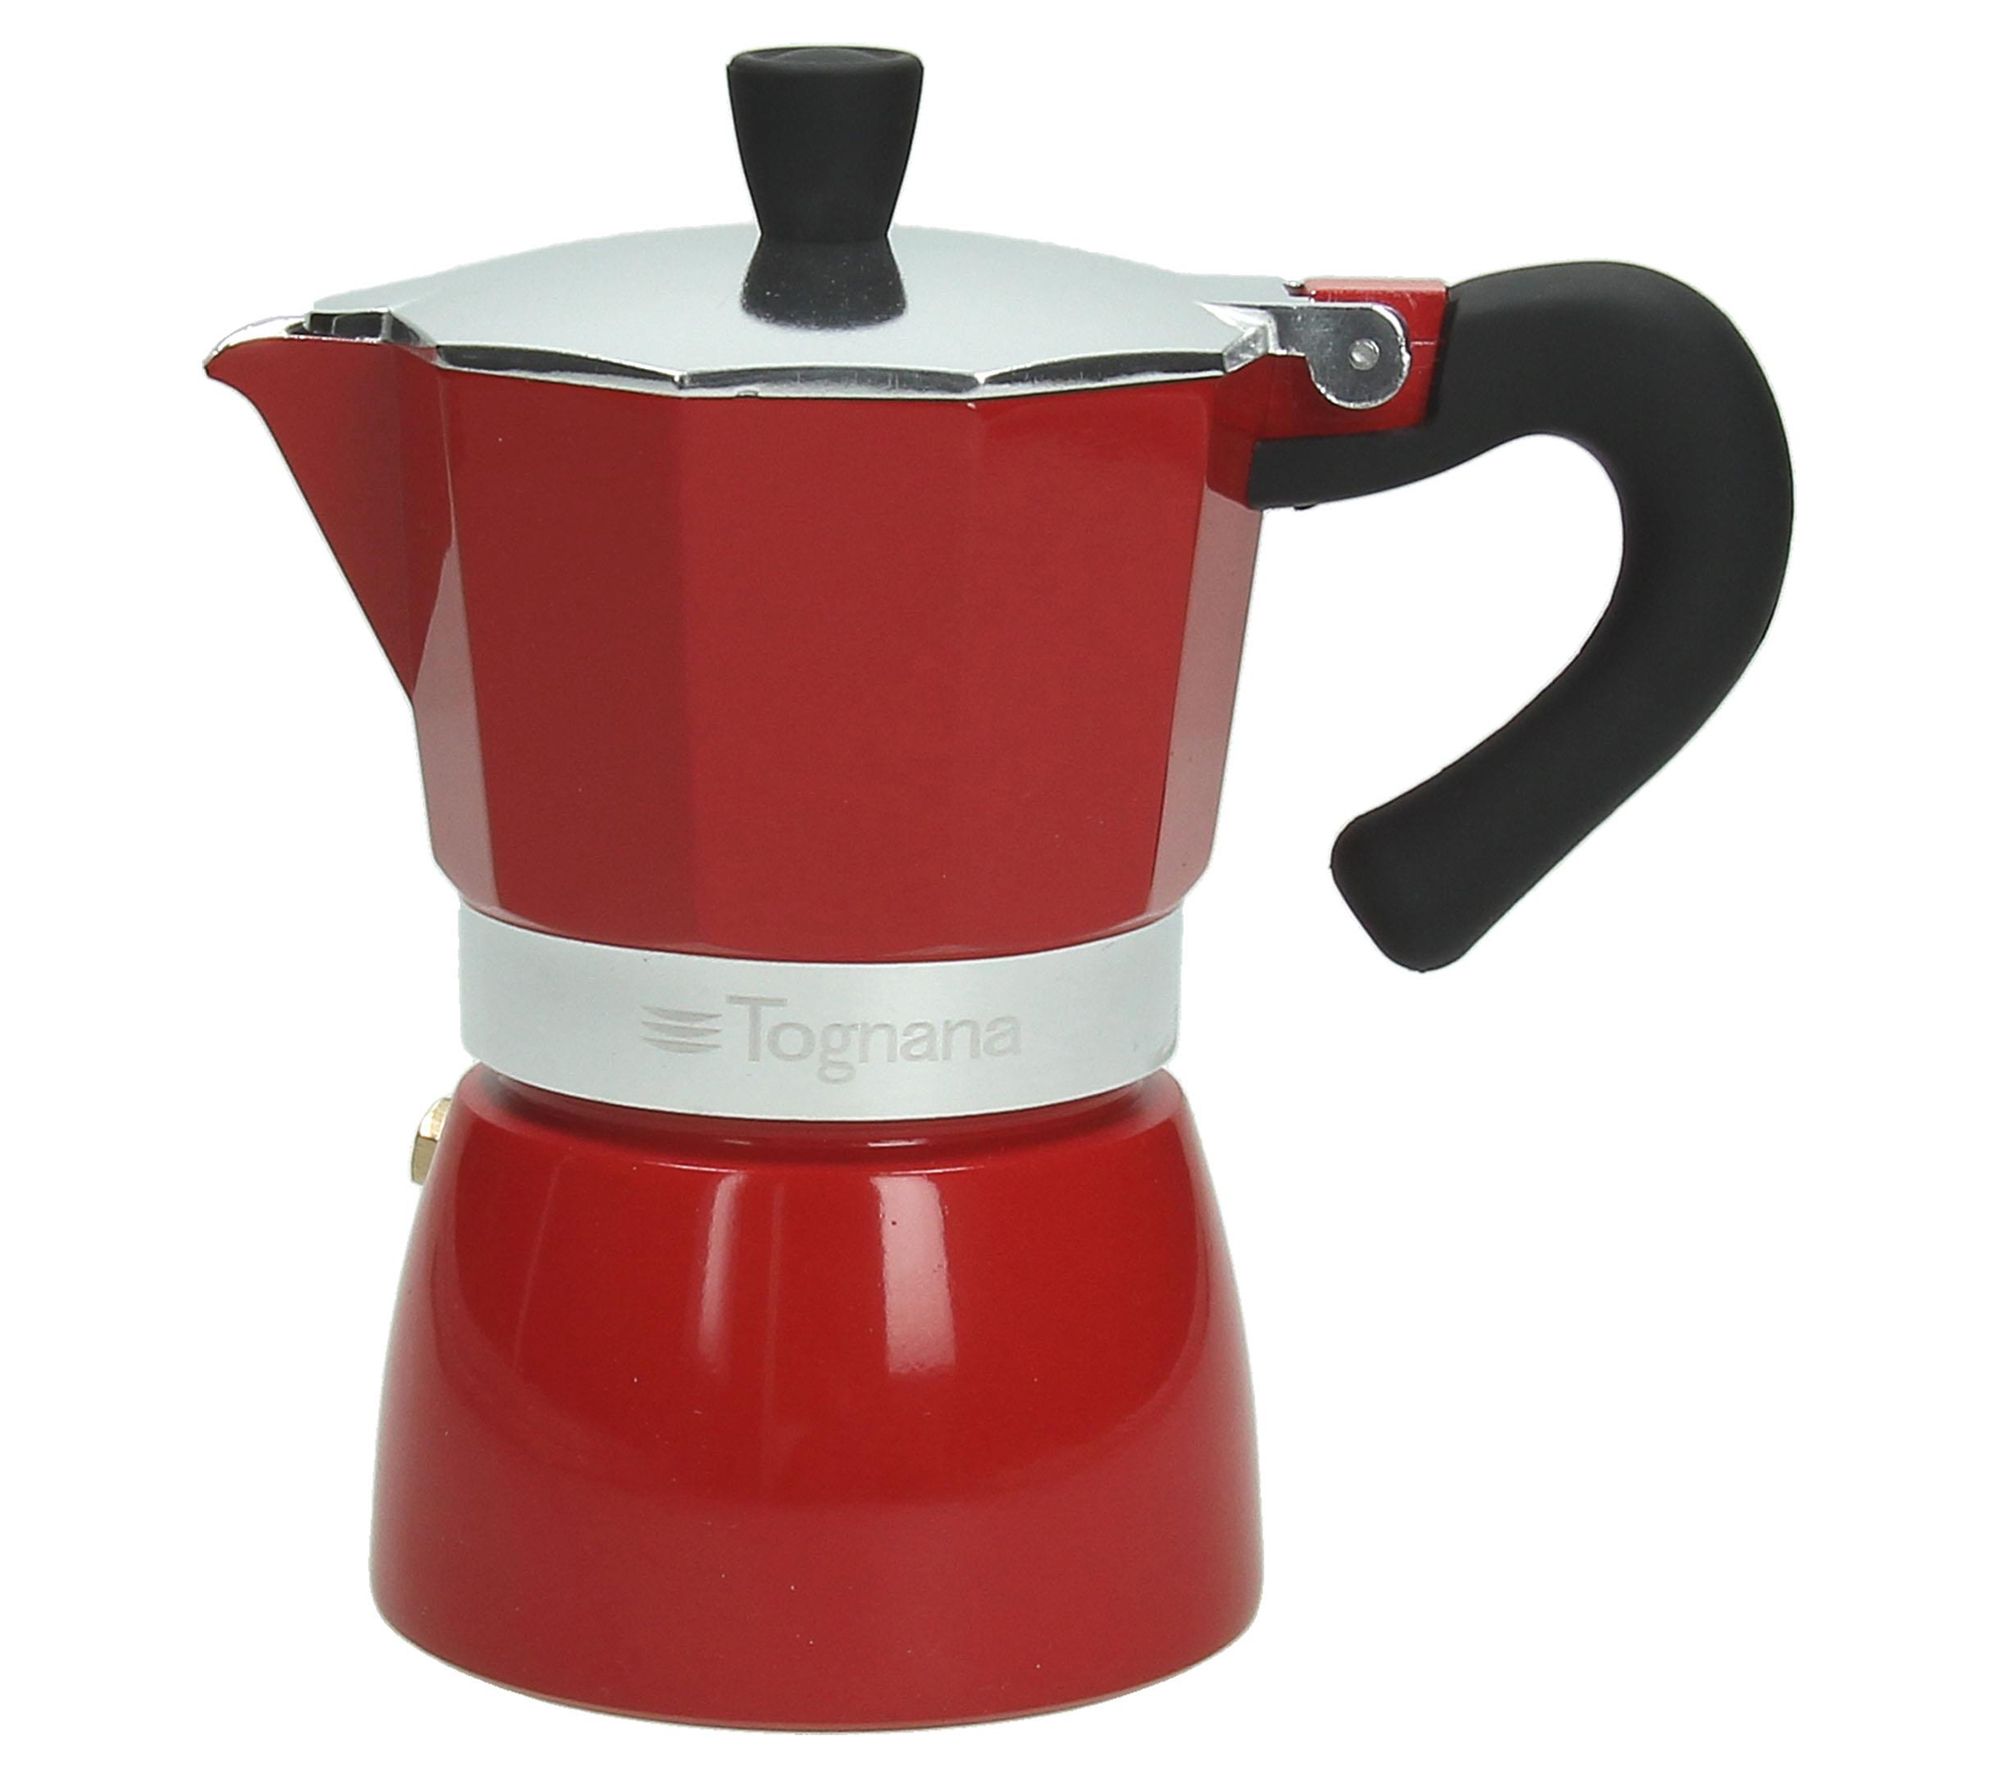 Tognana 6-Cup Stovetop Coffee Maker | Stone & Wood Style